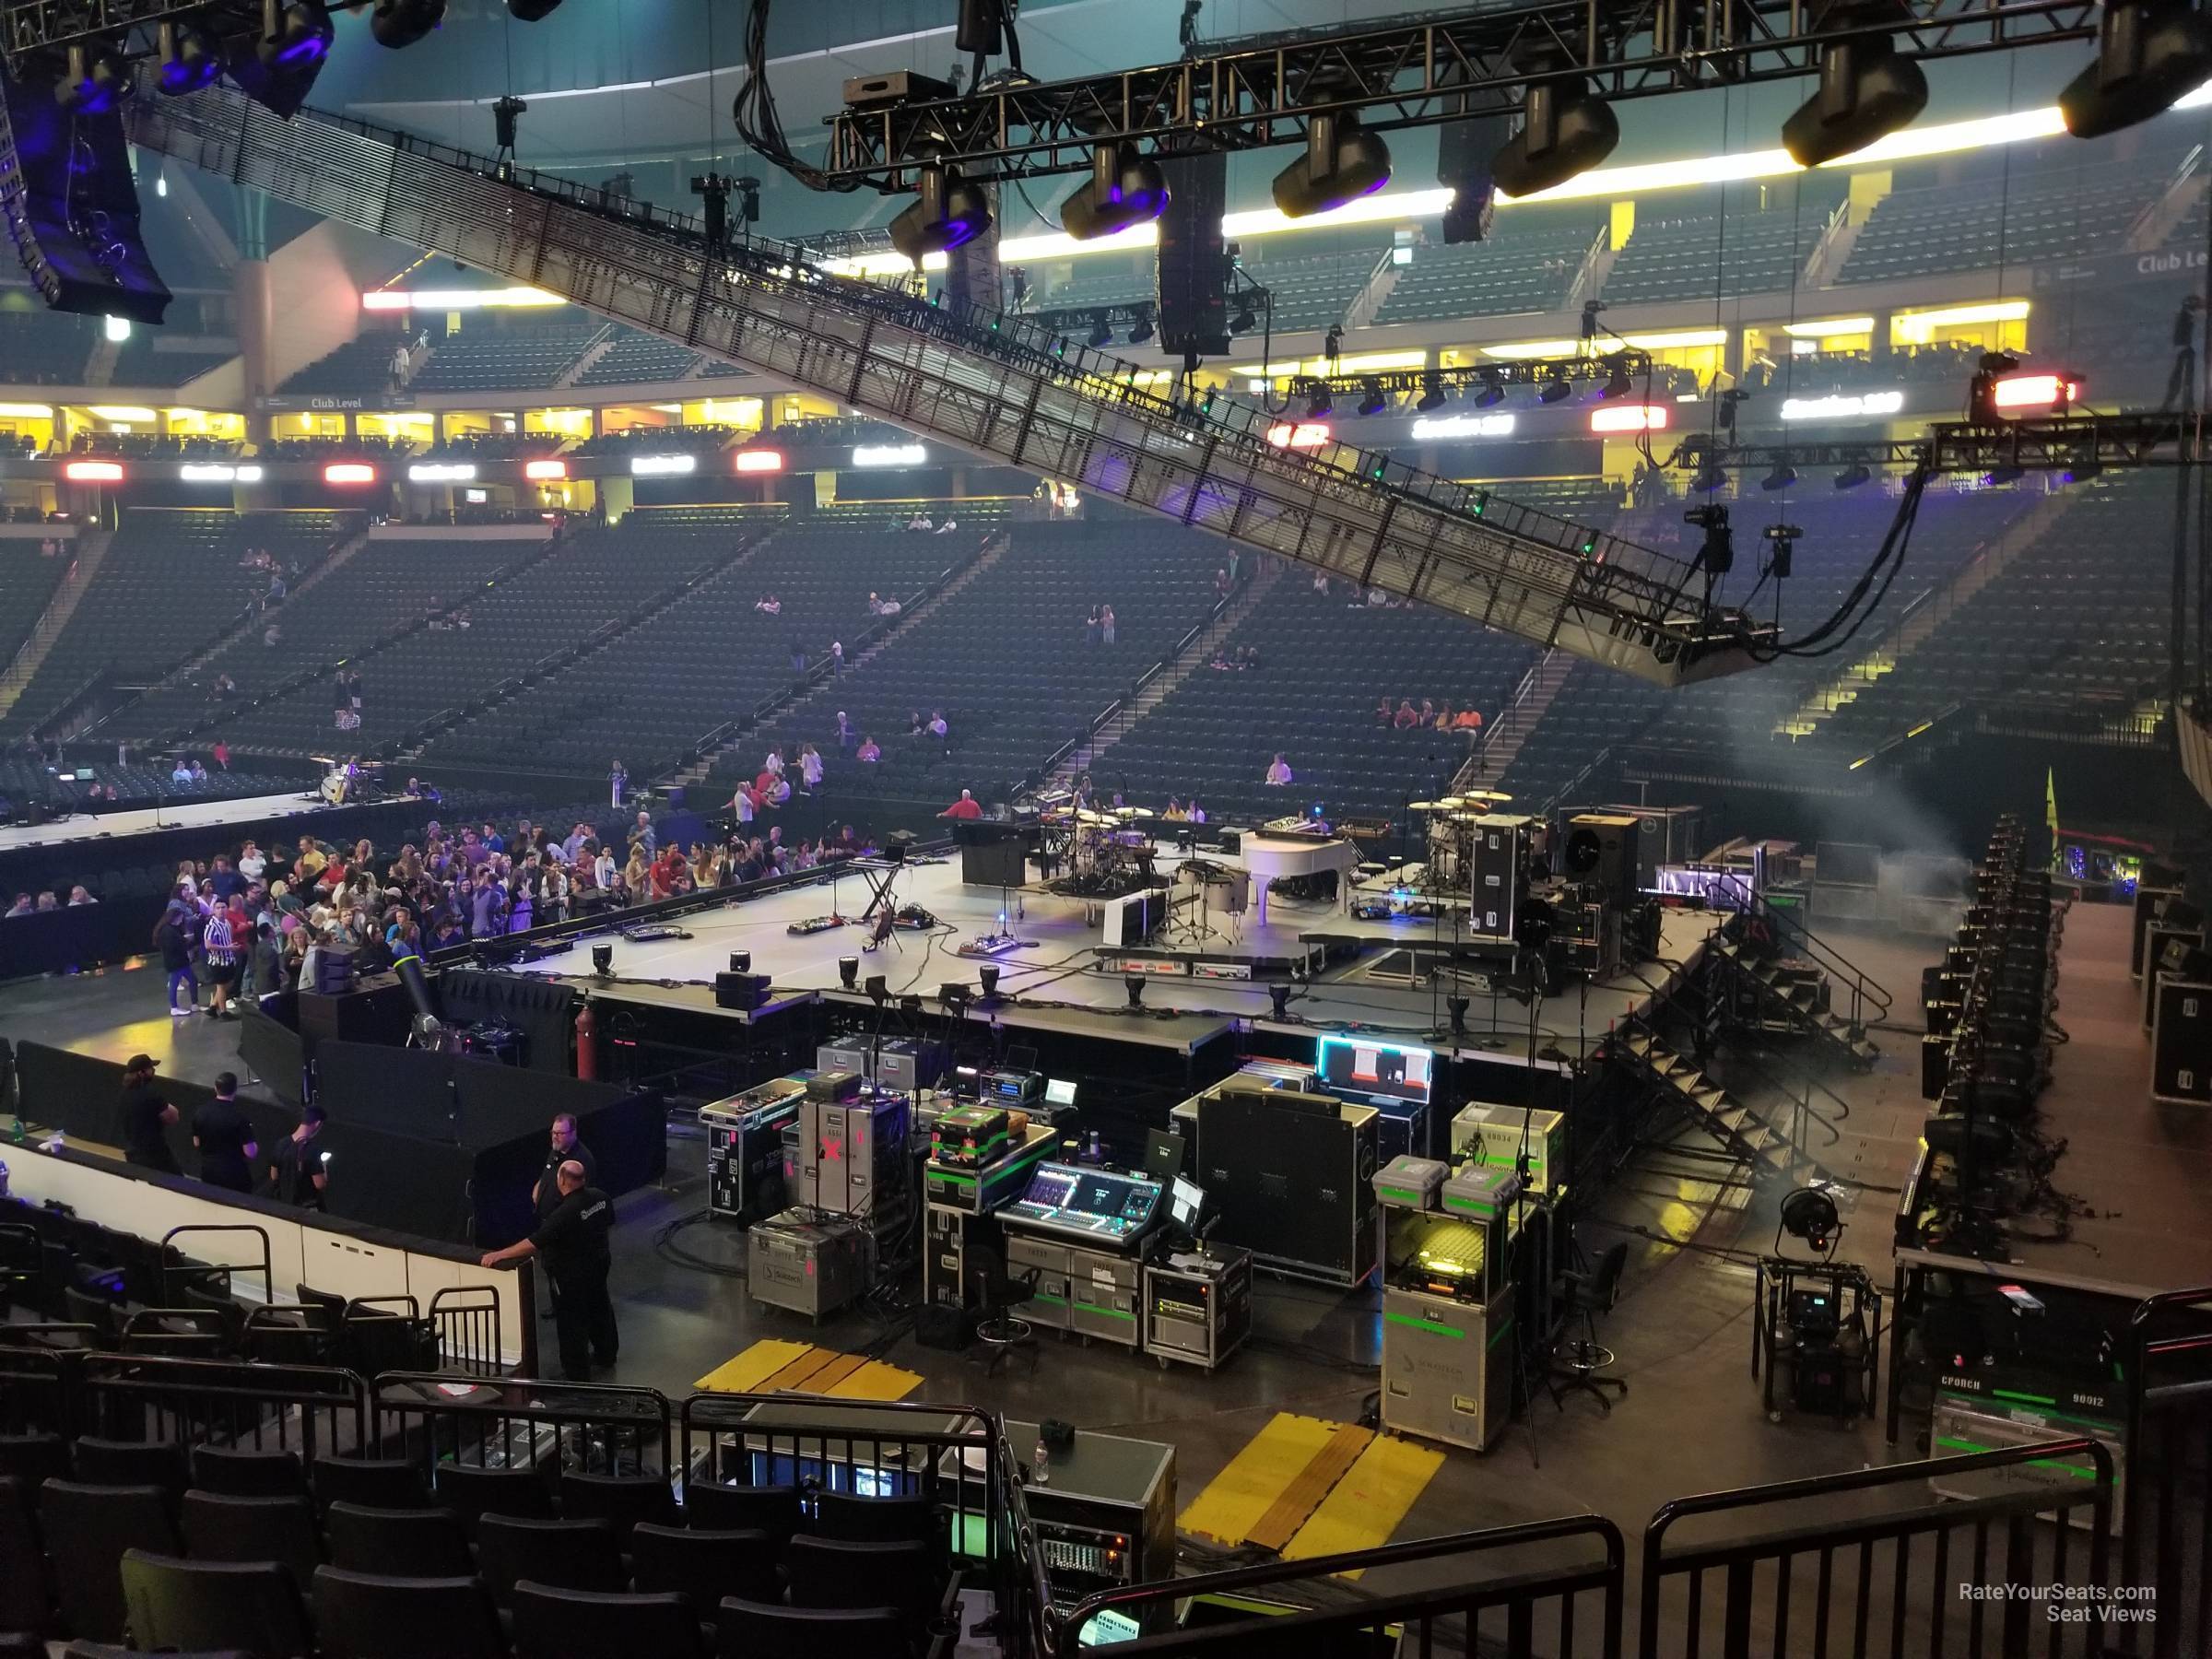 section 126, row 15 seat view  for concert - xcel energy center